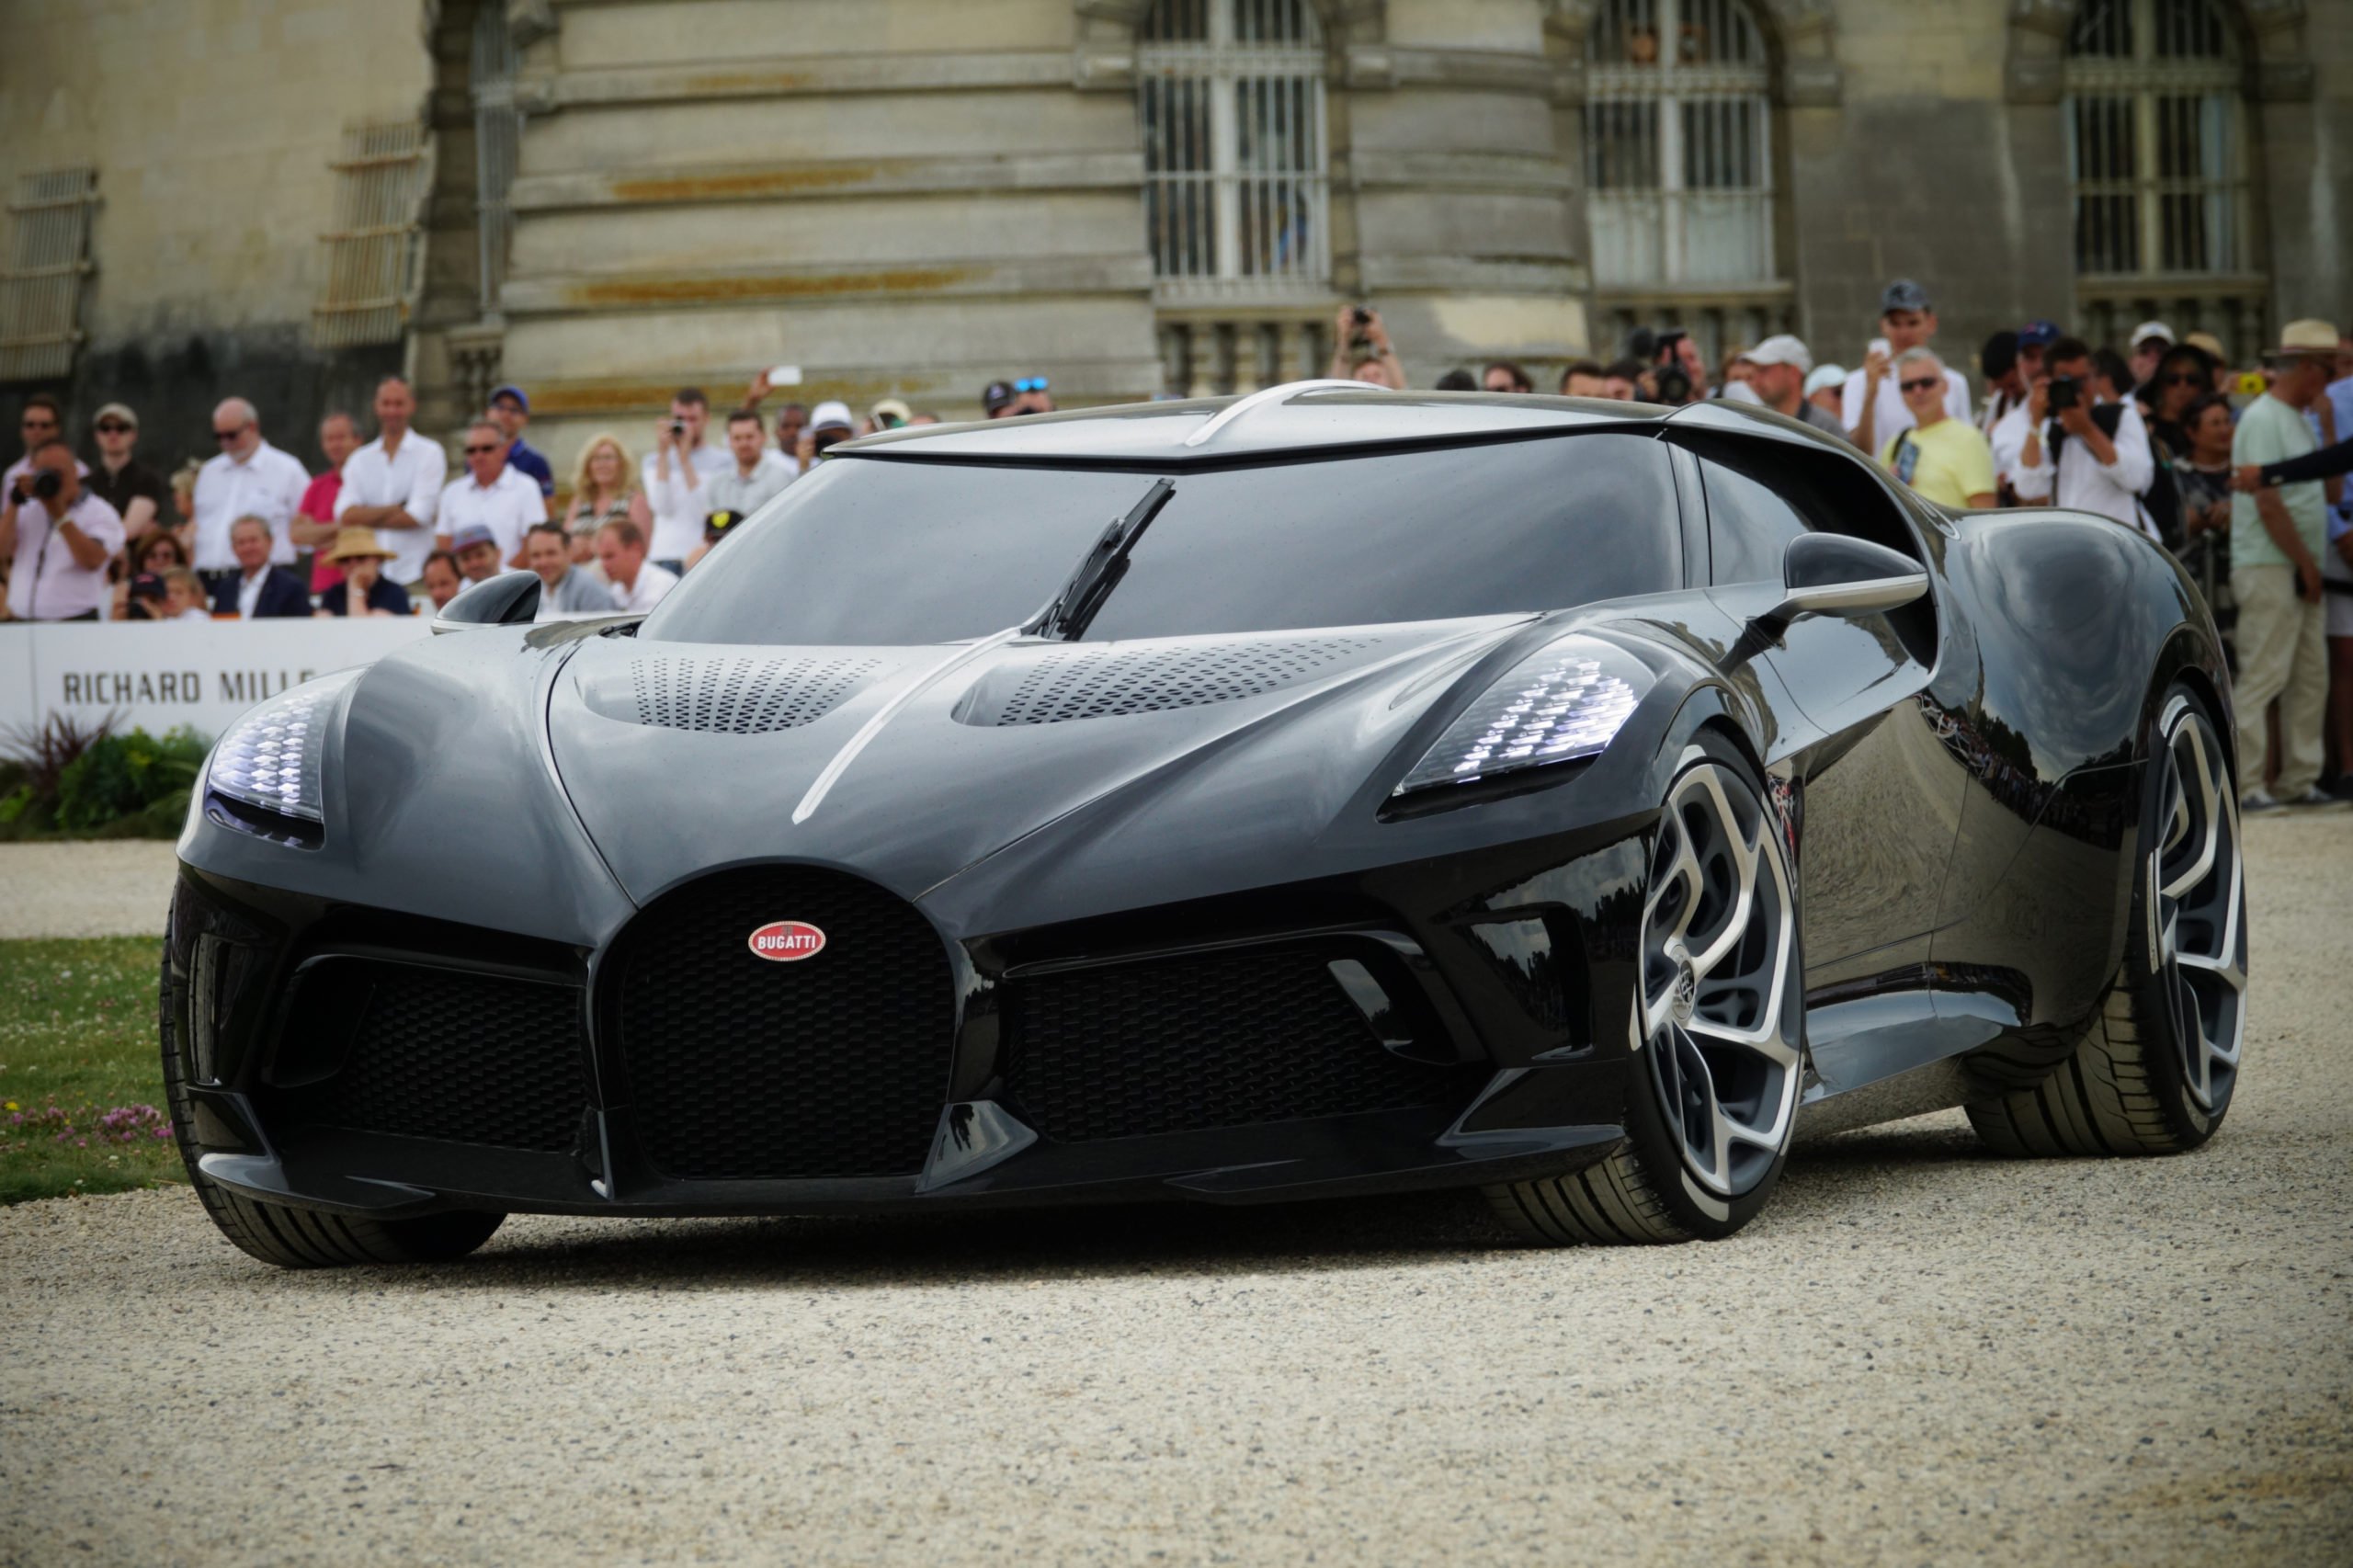 Top 10 Most Expensive Cars in the World 2021